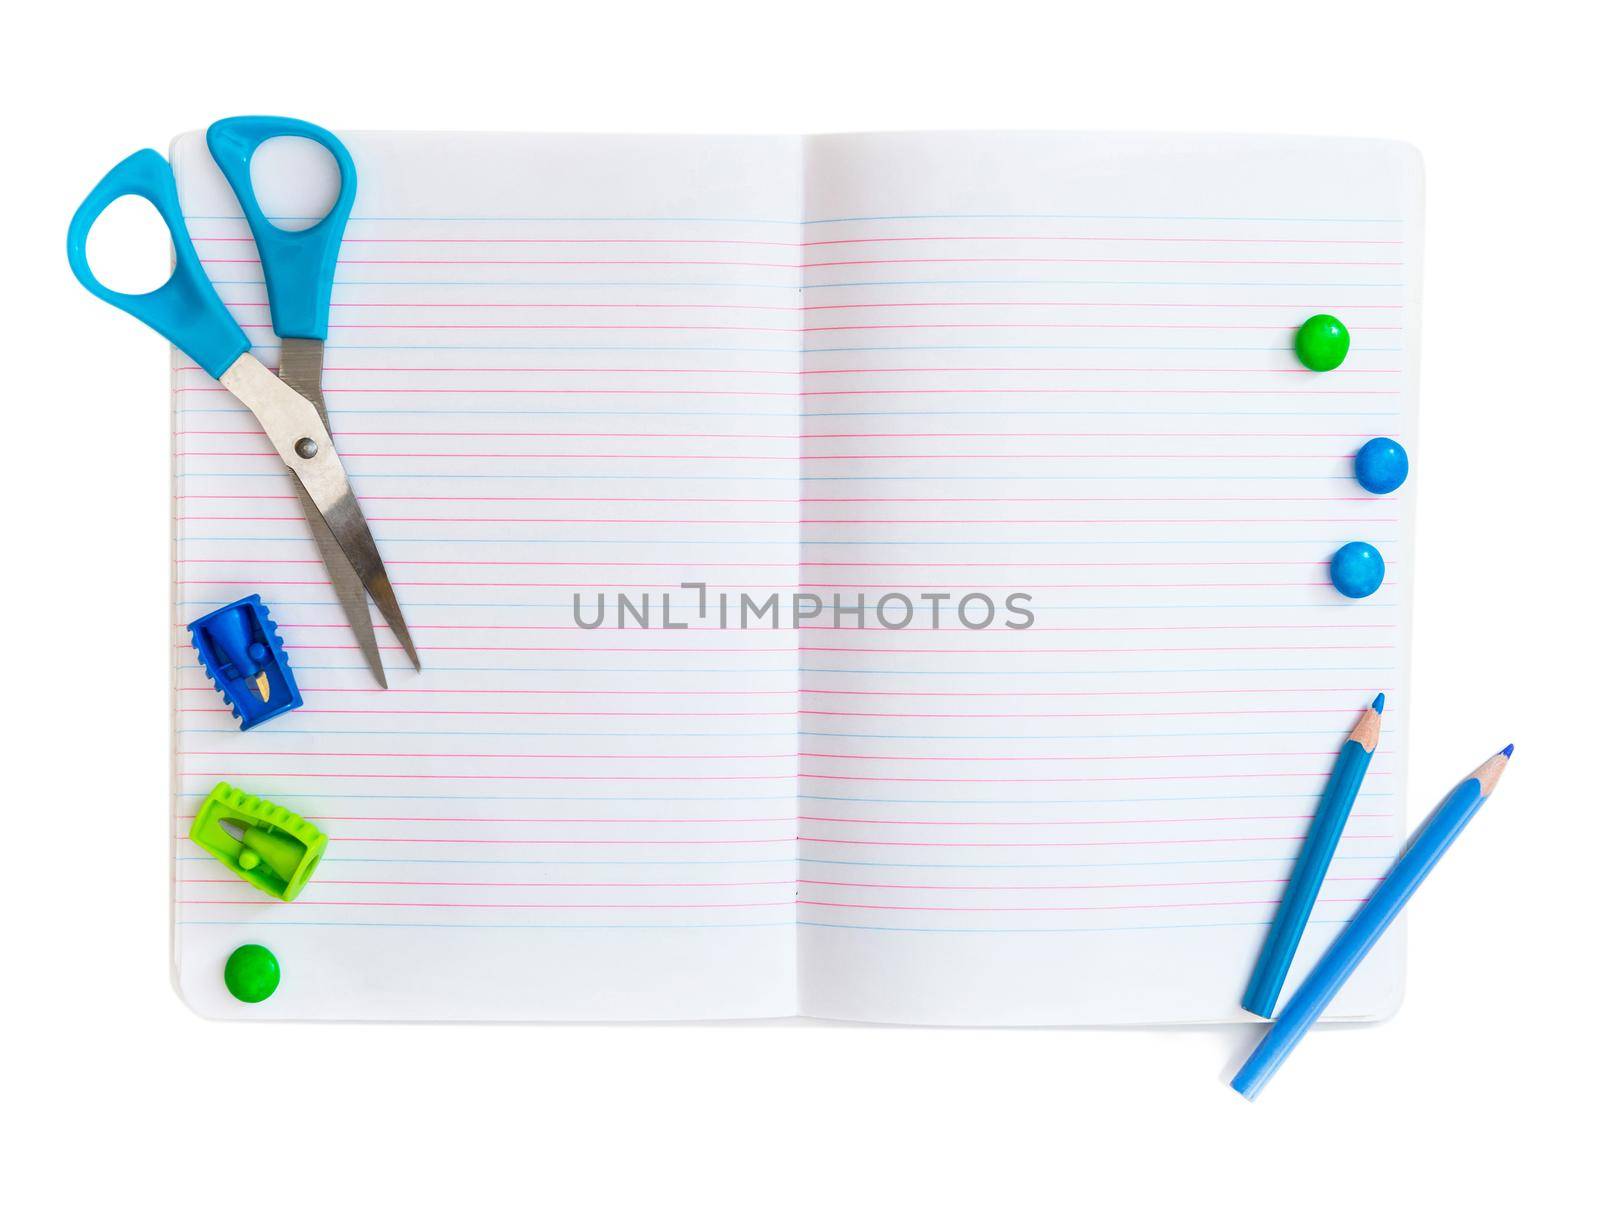 Group of school objects on a white background by tan4ikk1